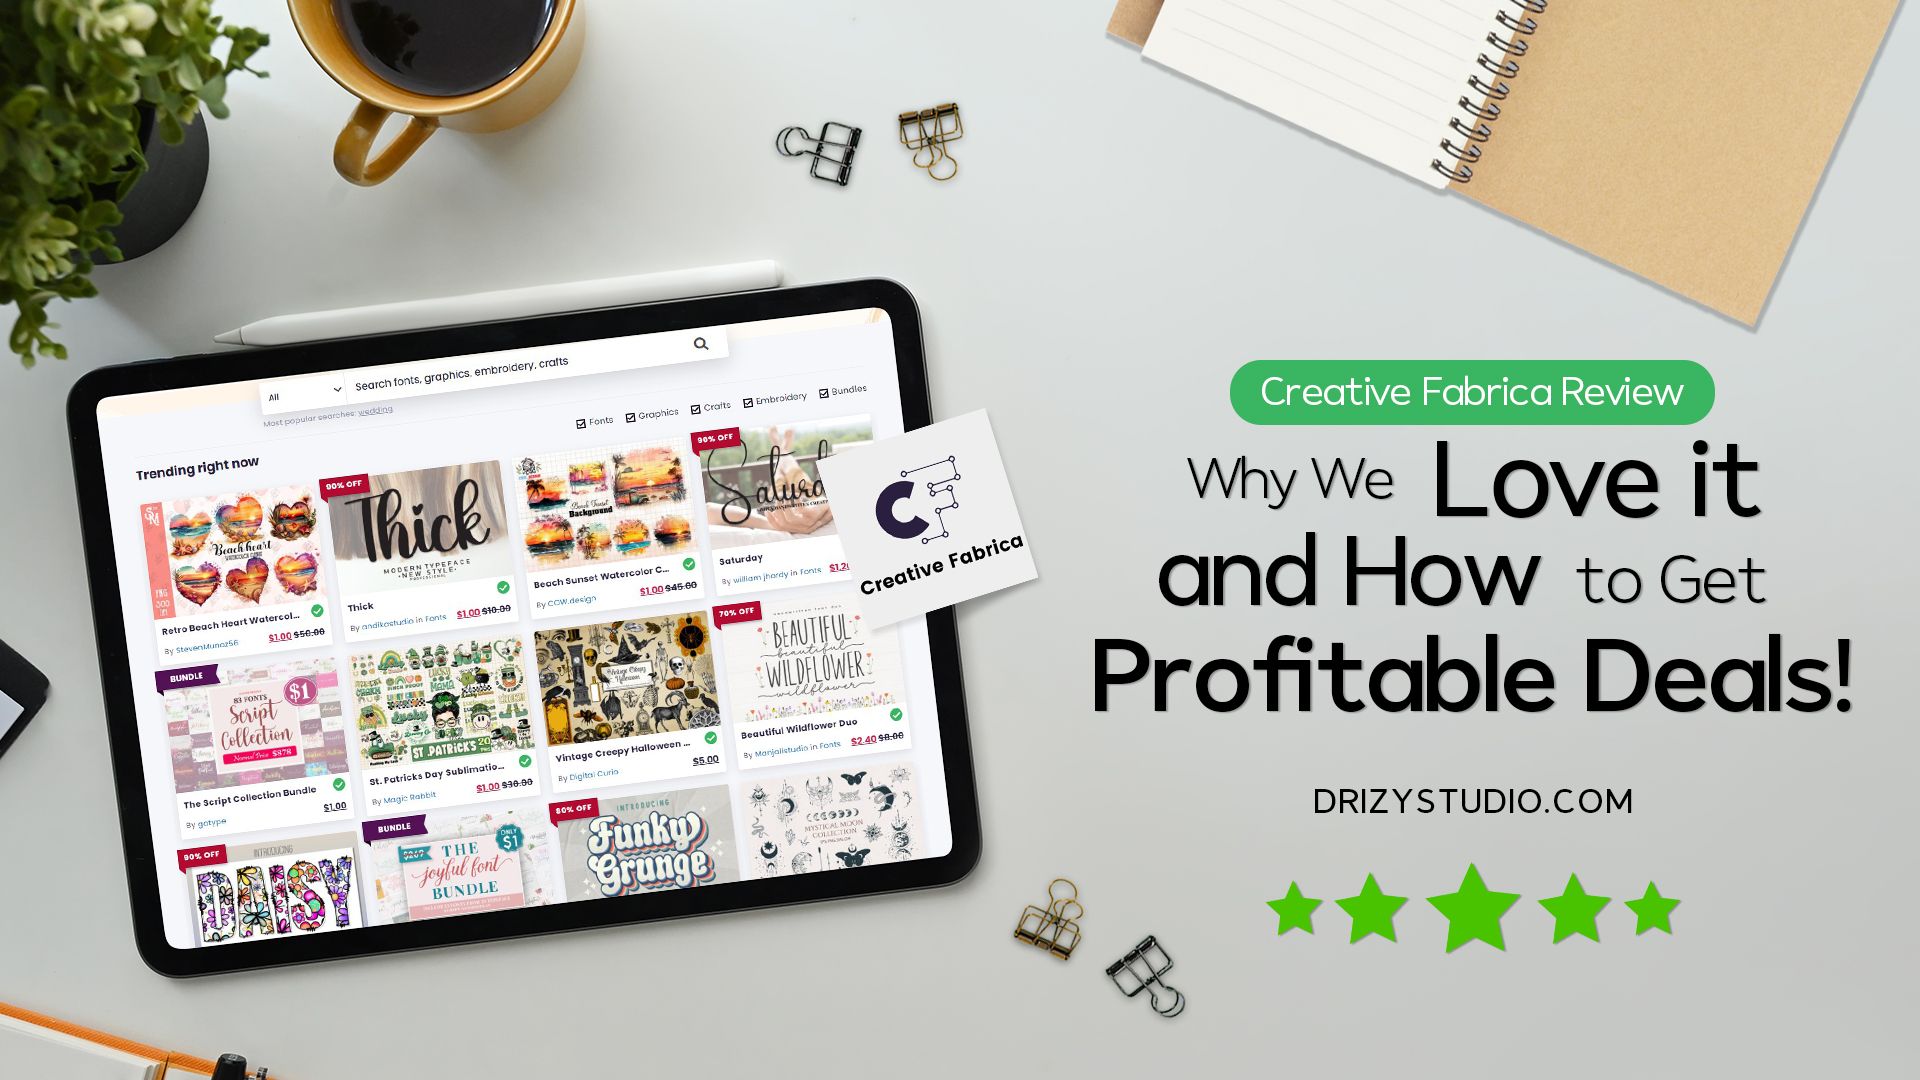 Creative Fabrica Review Why We Love It and How to Get Profitable Deals cover